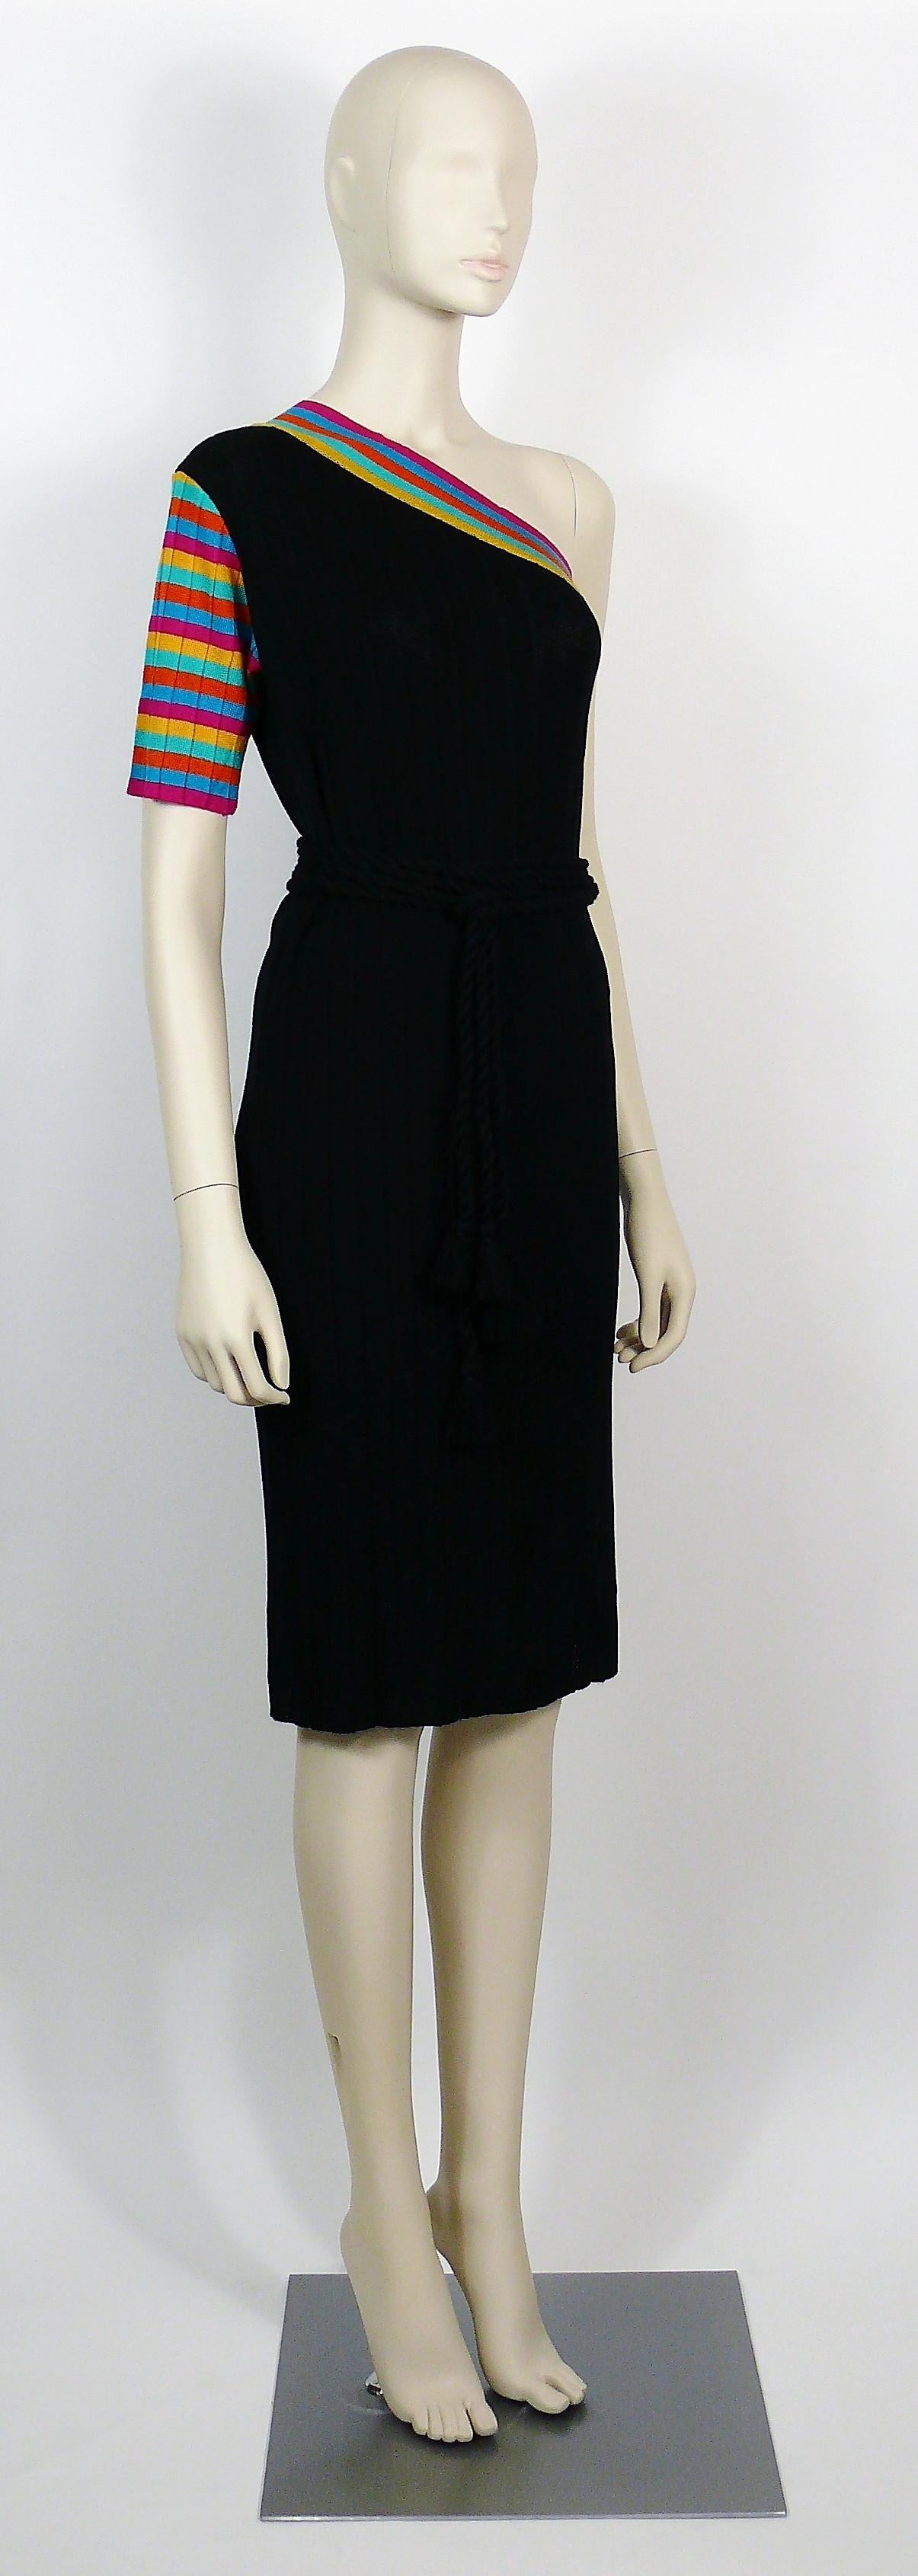 YVES SAINT LAURENT vintage tricot dress. 

This dress features :
- Knitted fabric in black with colorful stripes on the neckline, sleeve and side slit.
- Straight cut.
- One shoulder.
- Side slit.
- Original matching tassel black belts (2